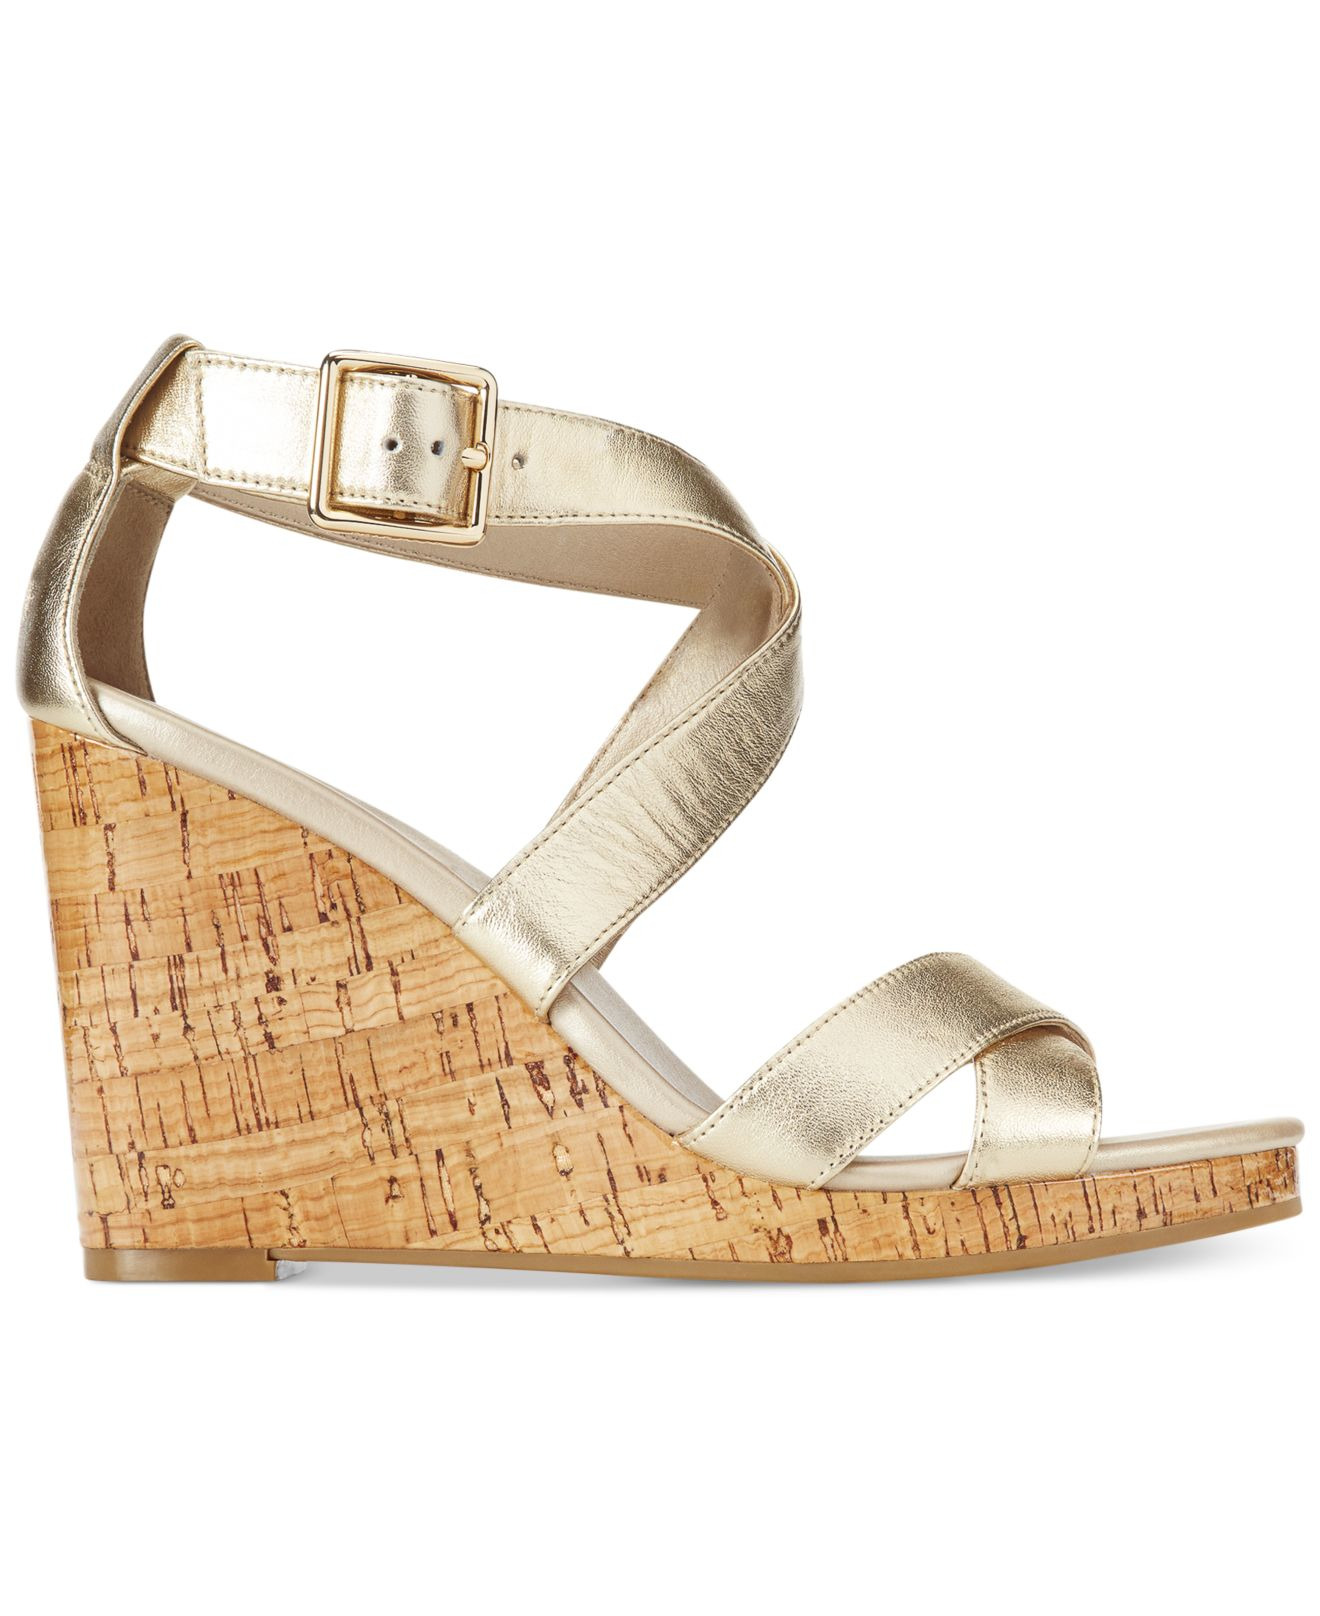 Cole haan Jillian Strappy Wedge Sandals in Gold (Soft Gold Metallic ...